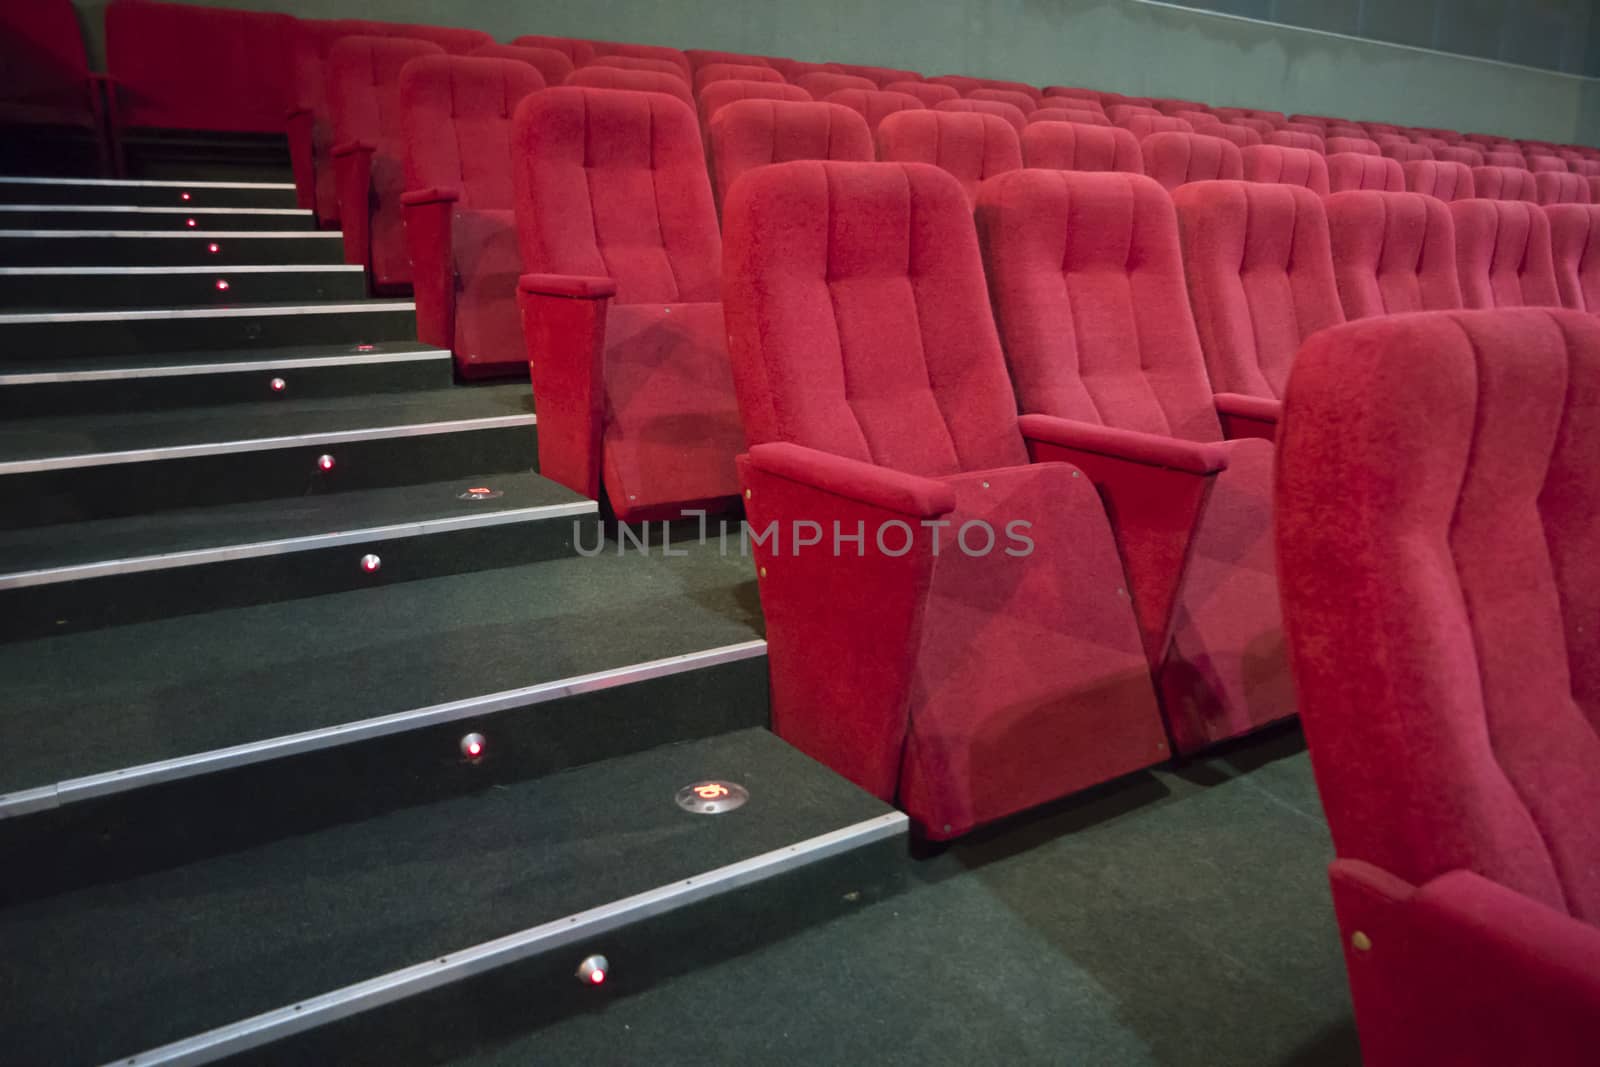 Aisle with rows of red seats in the modern theater